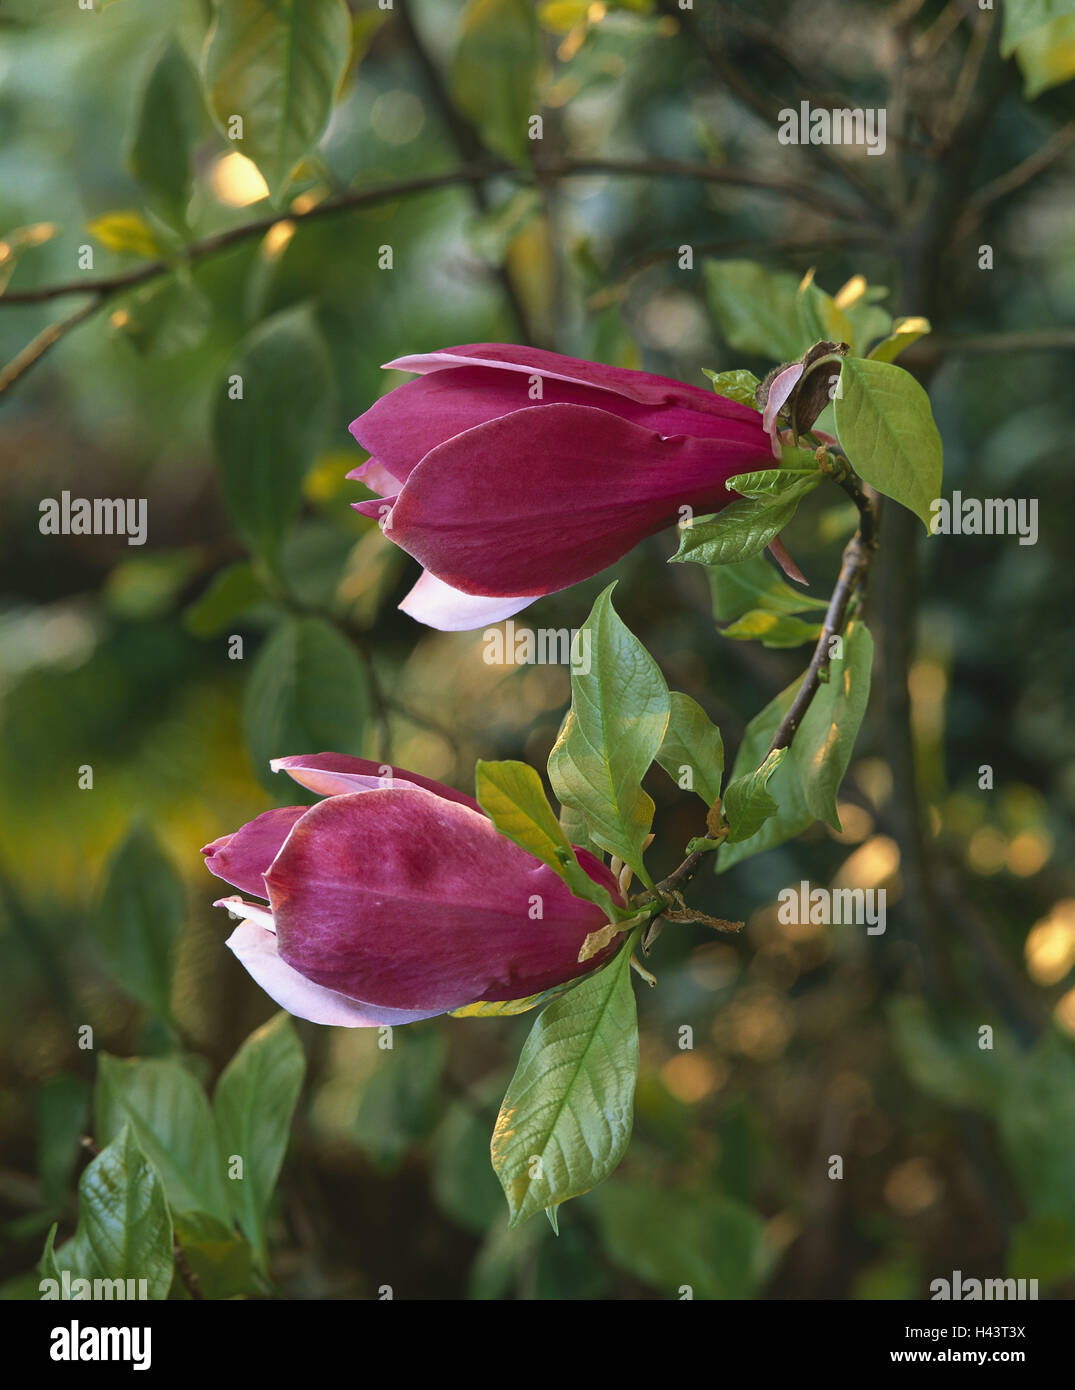 Magnolia tree, blossoms, pink, two, detail, ornamental plant, plant, shrub, ornamental tree, tree, magnolia, leaves, petals, red, calyxes, closed, side by side, upright, season, period bloom, spring, nature, flora, Stock Photo